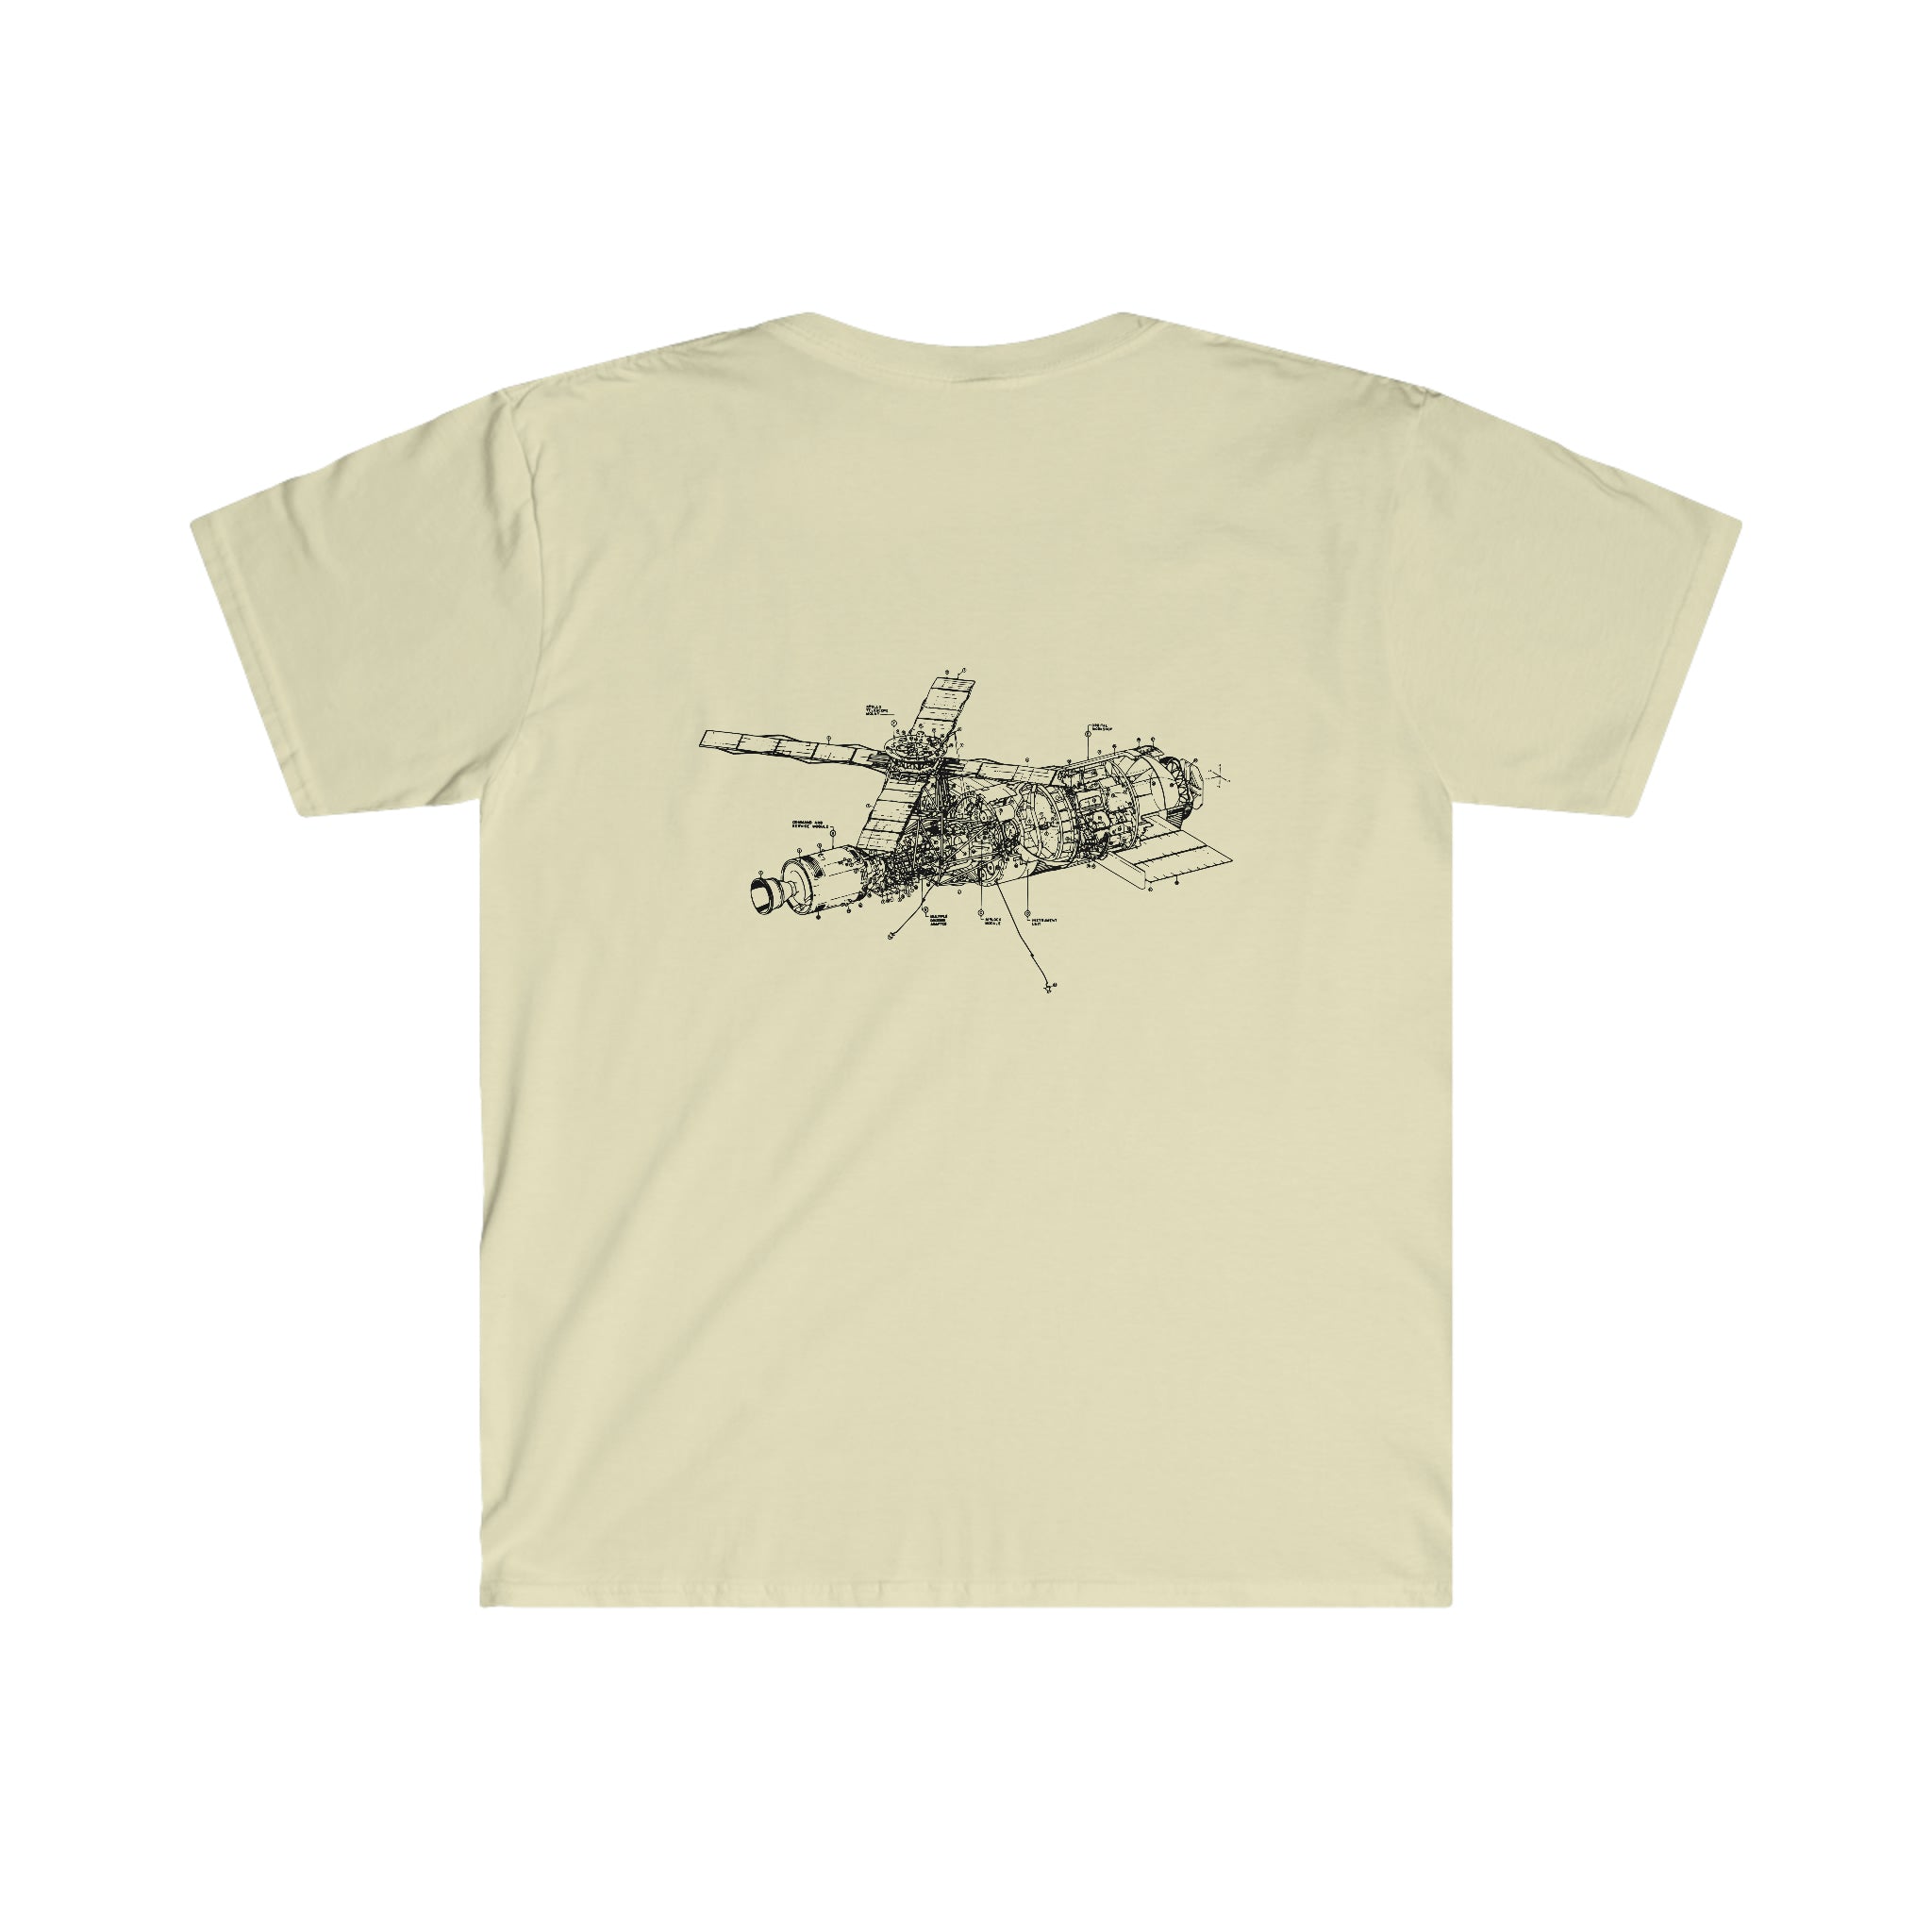 A Deep Deep Space t-shirt with a drawing of a plane on it by One Tee Project.